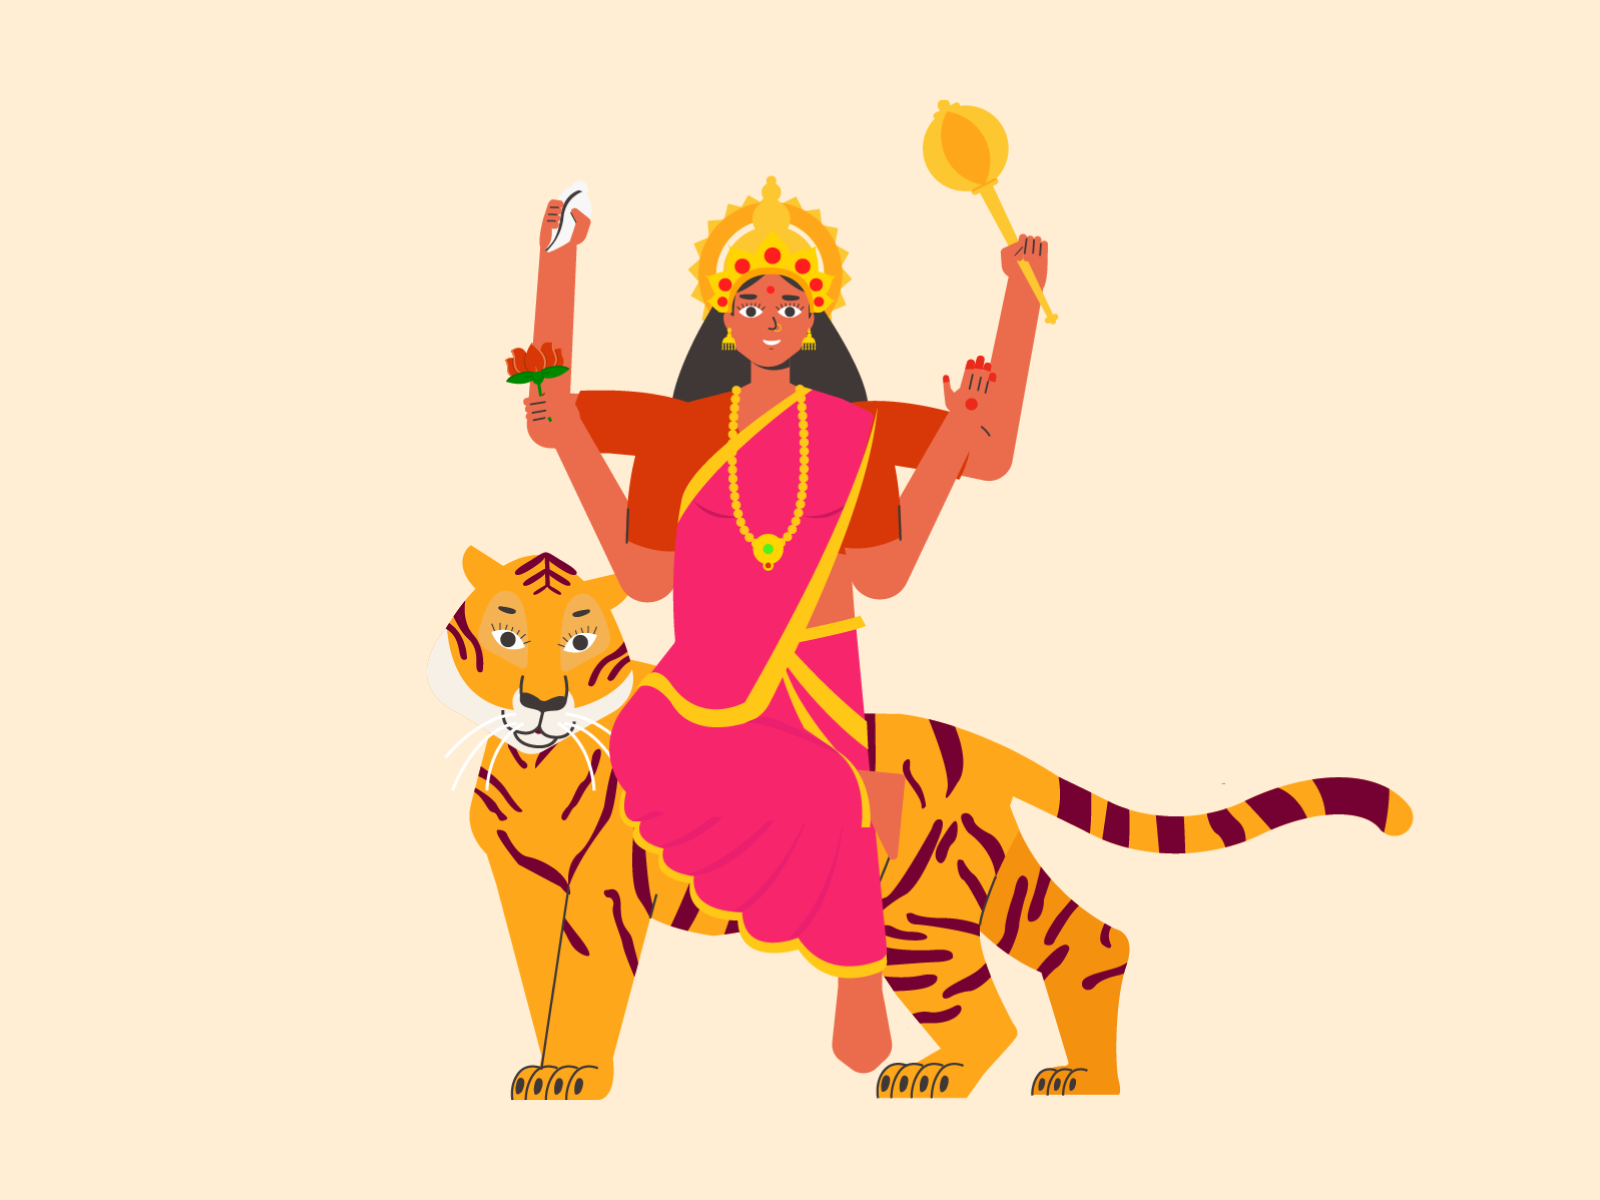 Goddess Durga by Crafttor on Dribbble